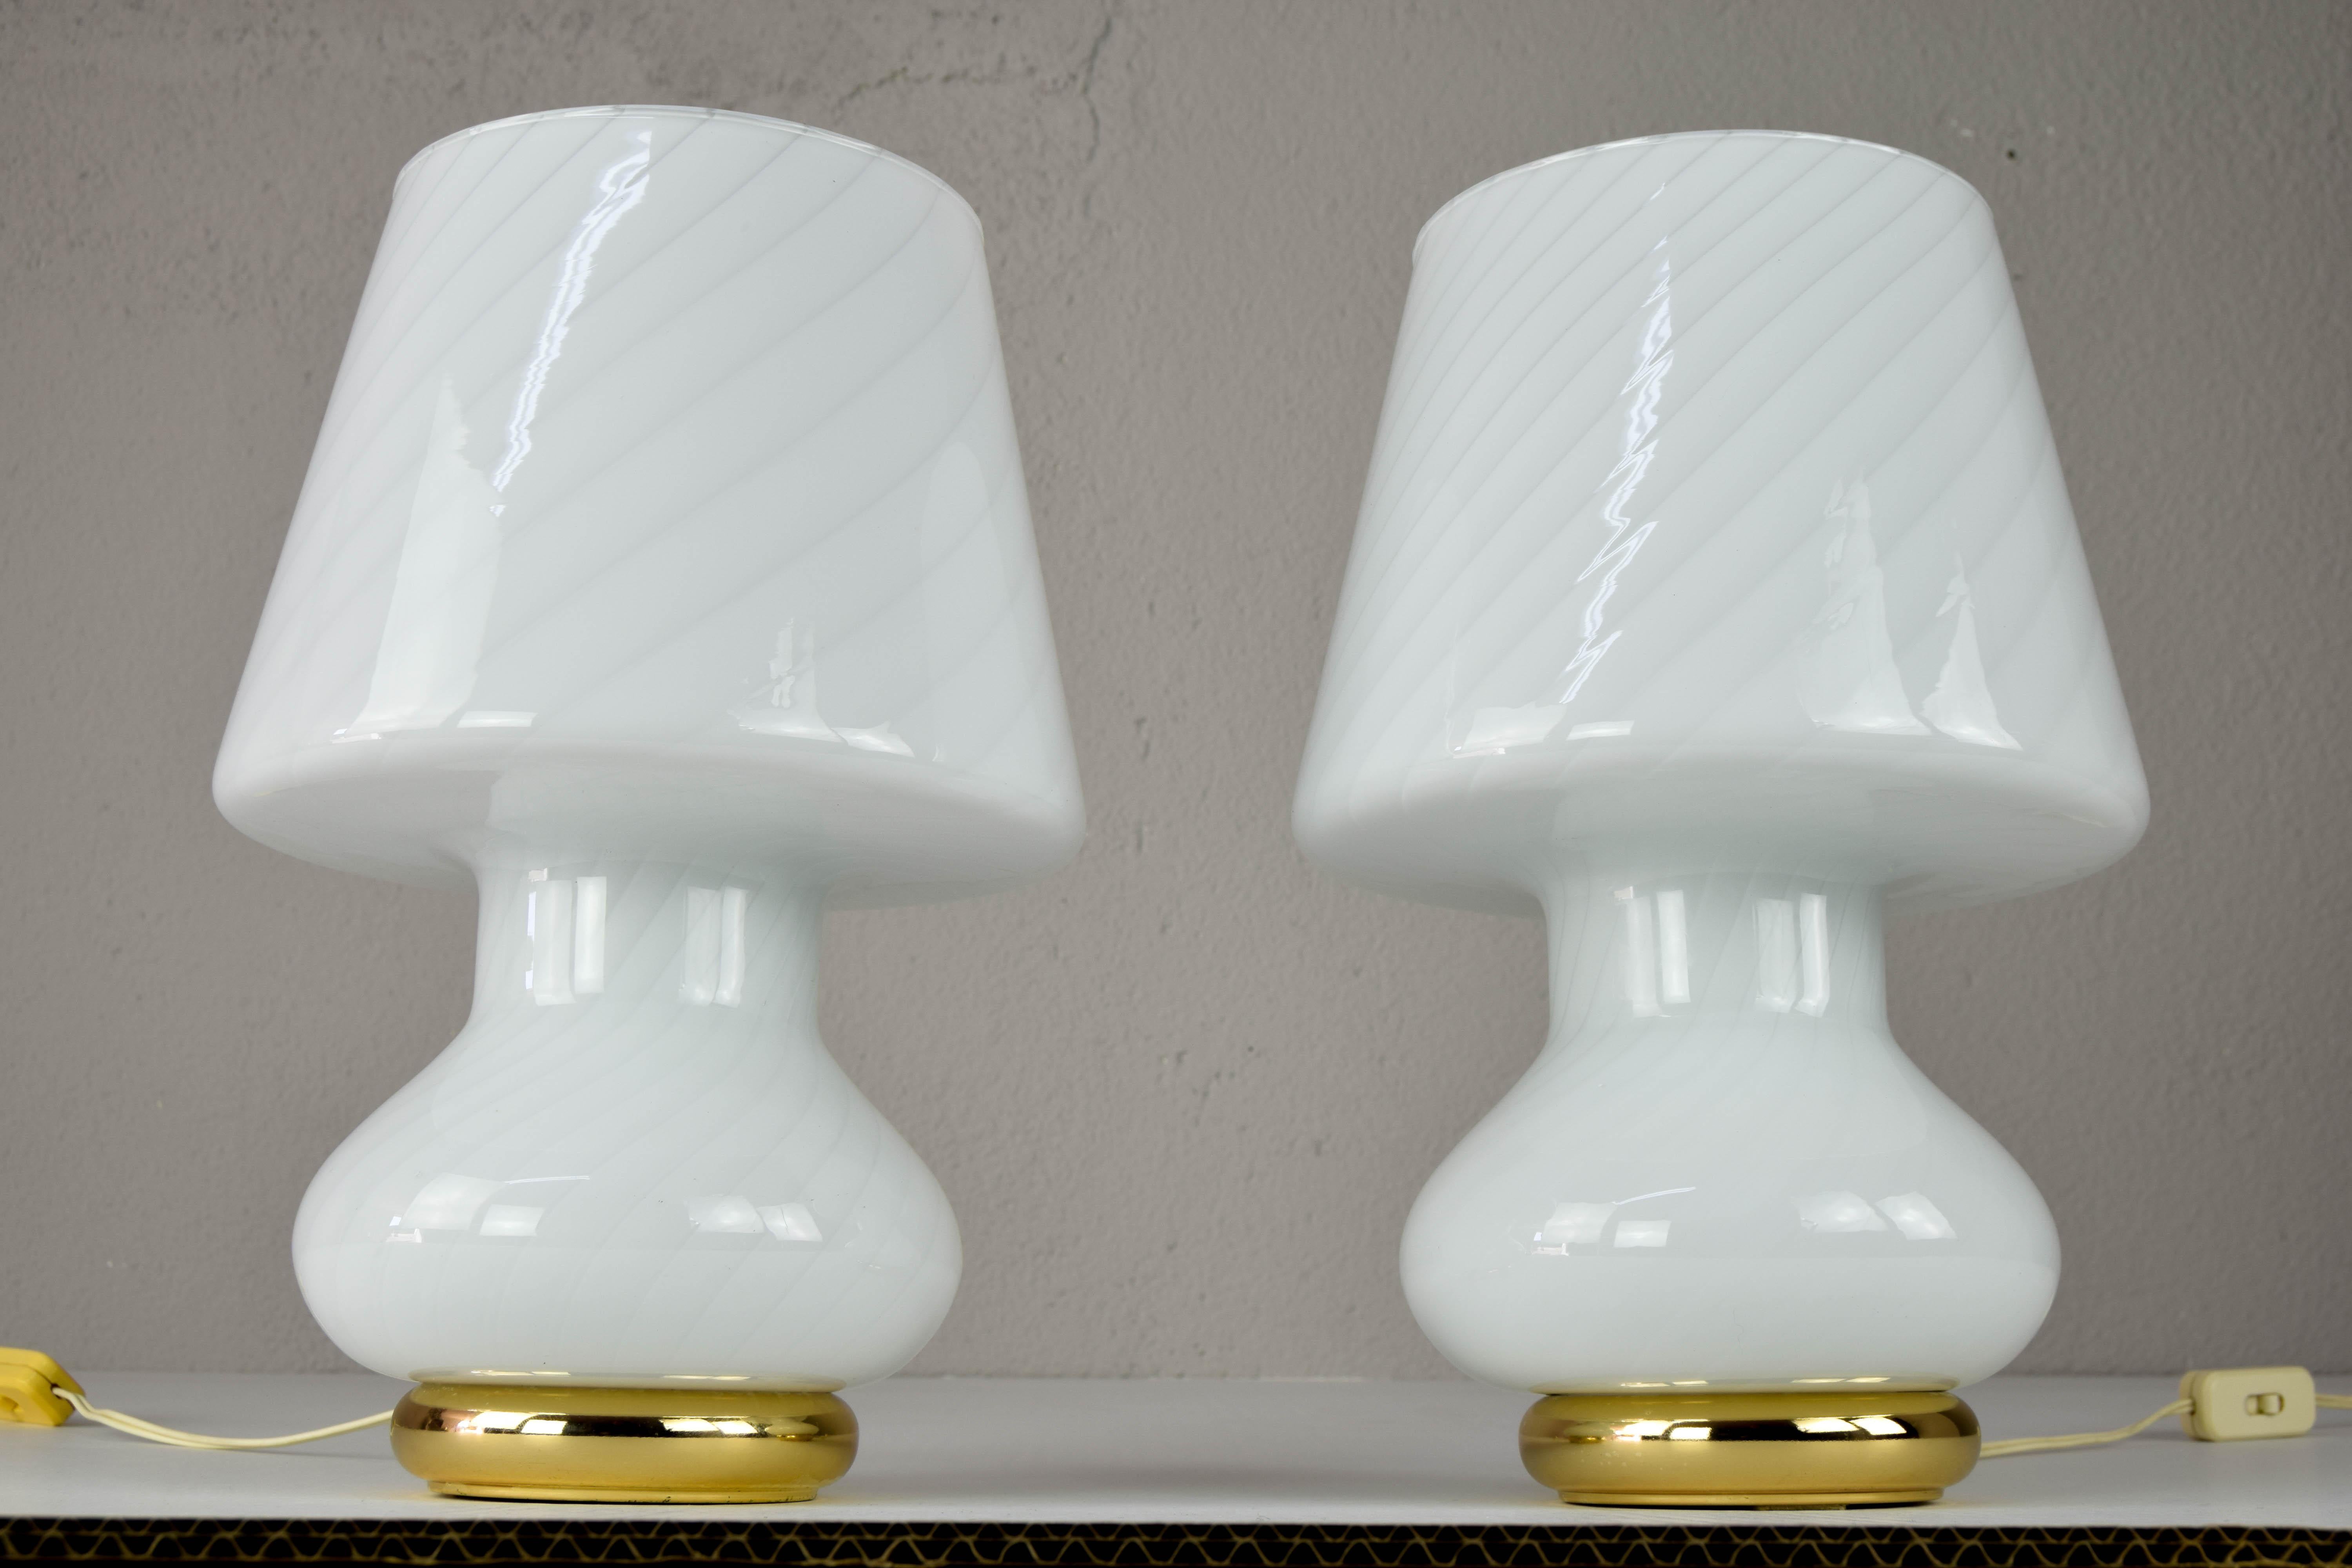 Set of two hand-blown Murano glass table lamps for Vetri, Italy, in the 1960s.
This pair of fluted white mushroom lamps in the shape of a swirl and with a brass base, is in an excellent state of conservation, with no faults or bruises on the